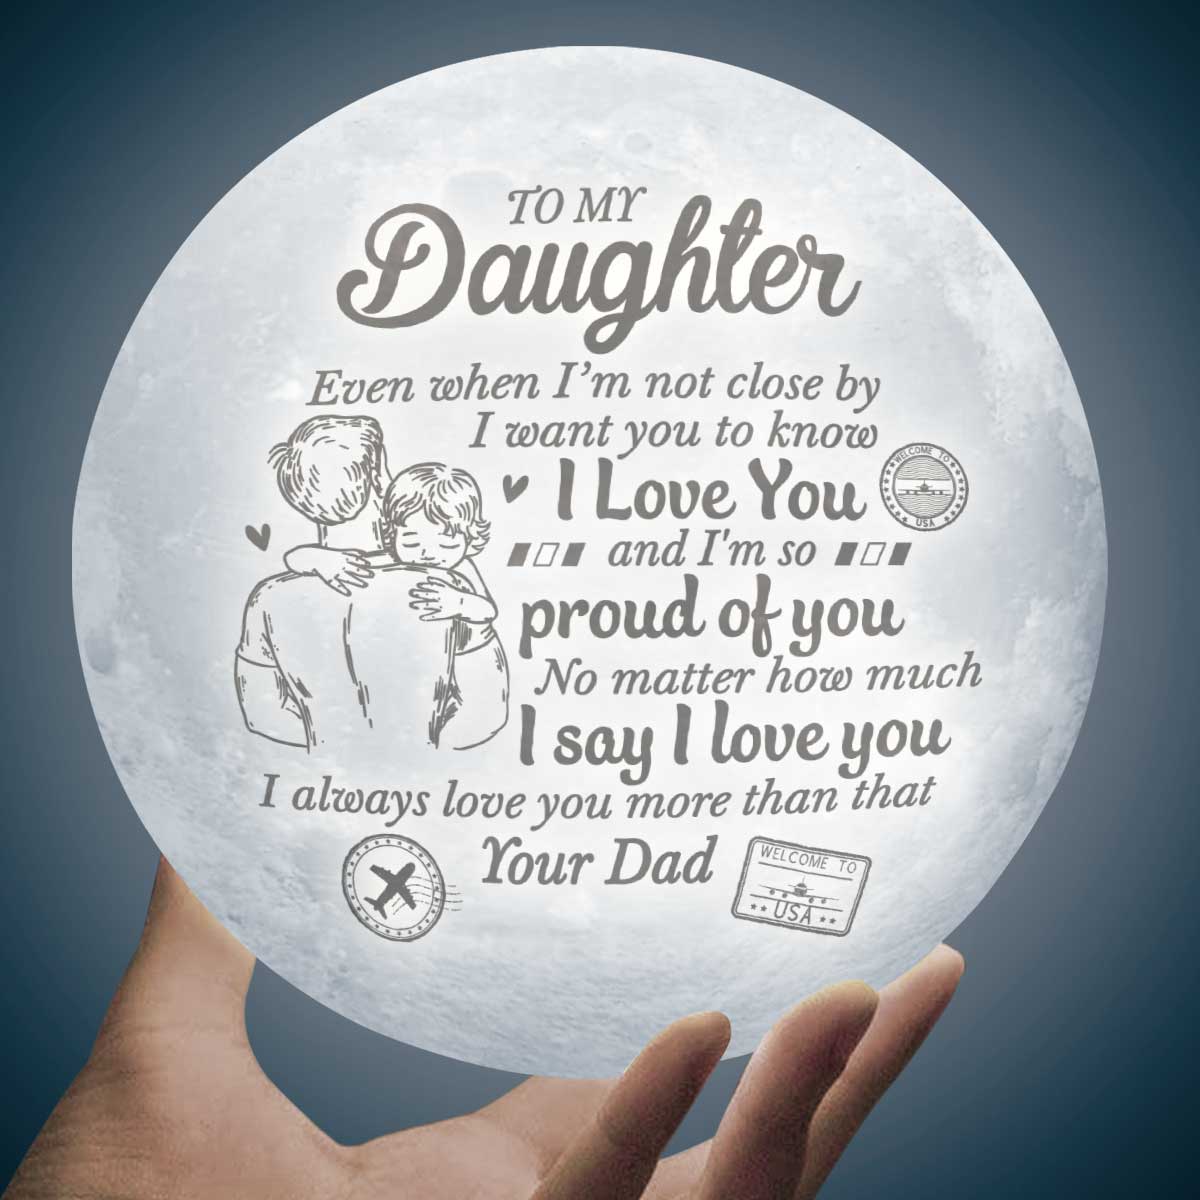 Always Love You More Than That 3d Printed Moon Lamp - To My Daughter From Dad - Birthday Gift For Daughter - Valentines Day Gifts For Daughter